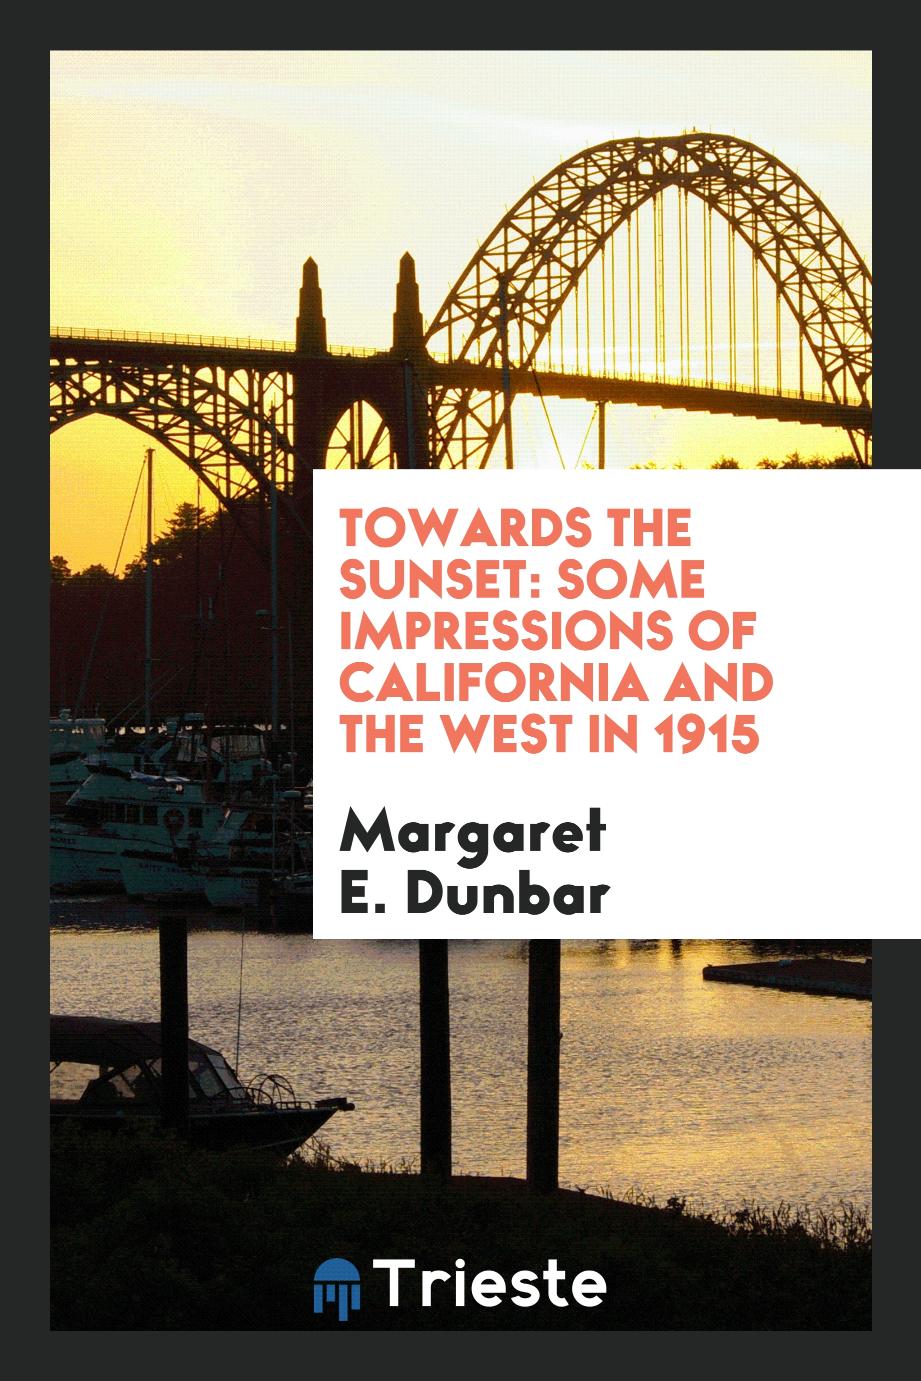 Towards the Sunset: Some Impressions of California and the West in 1915